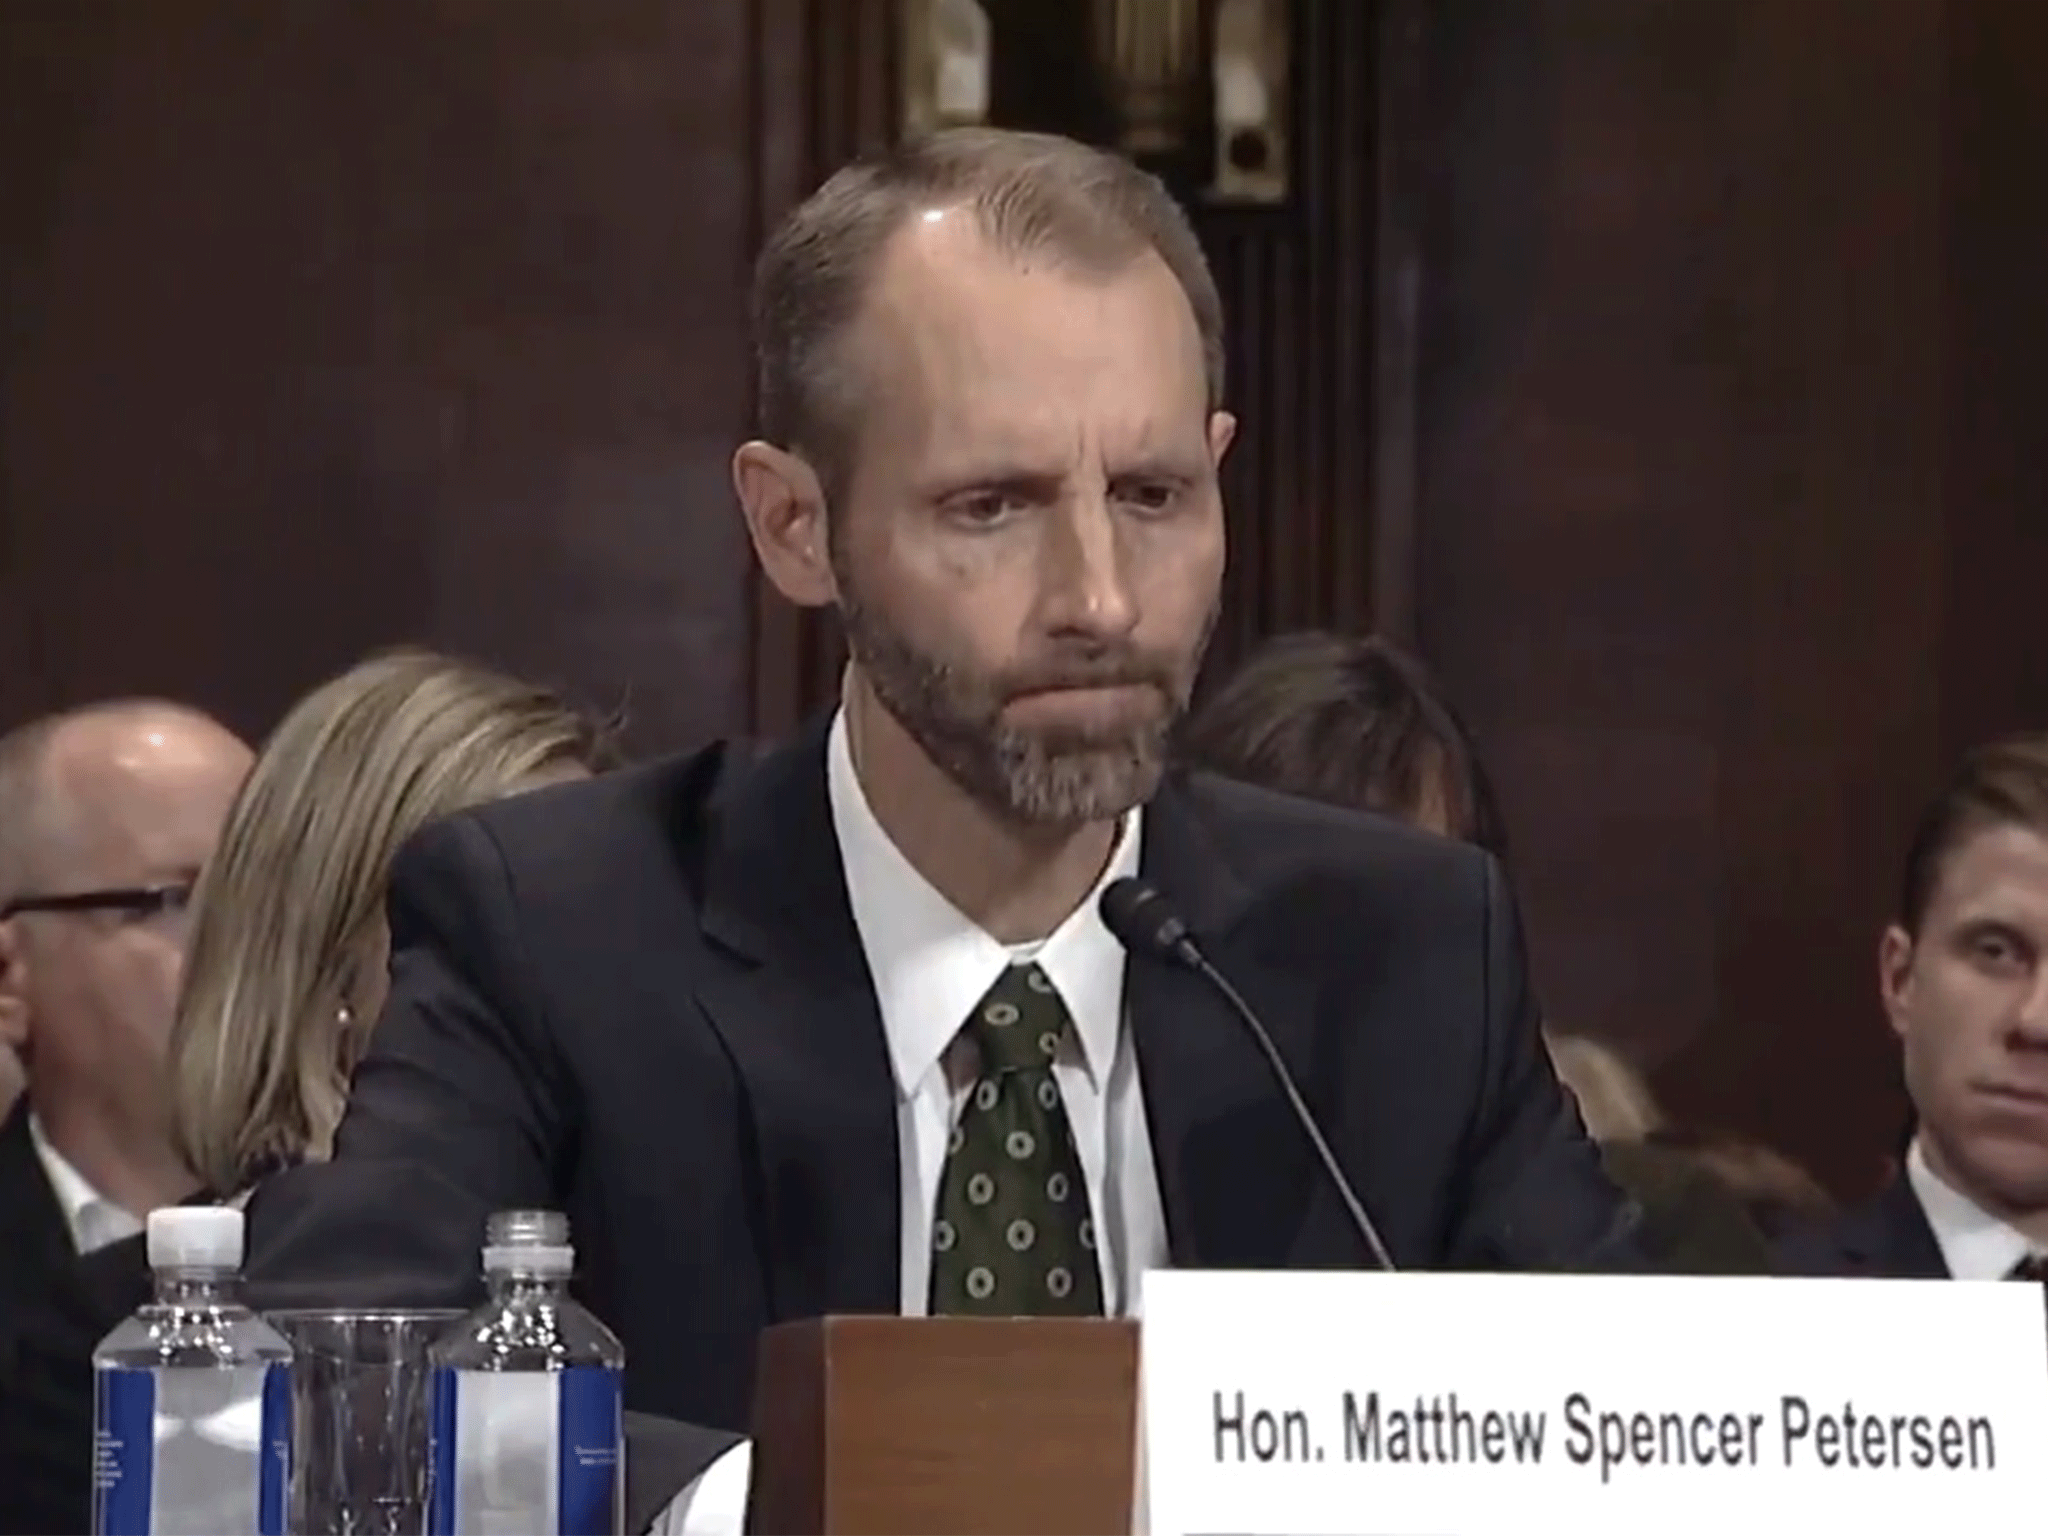 Matthew Spencer Petersen struggled to answer basic questions about law